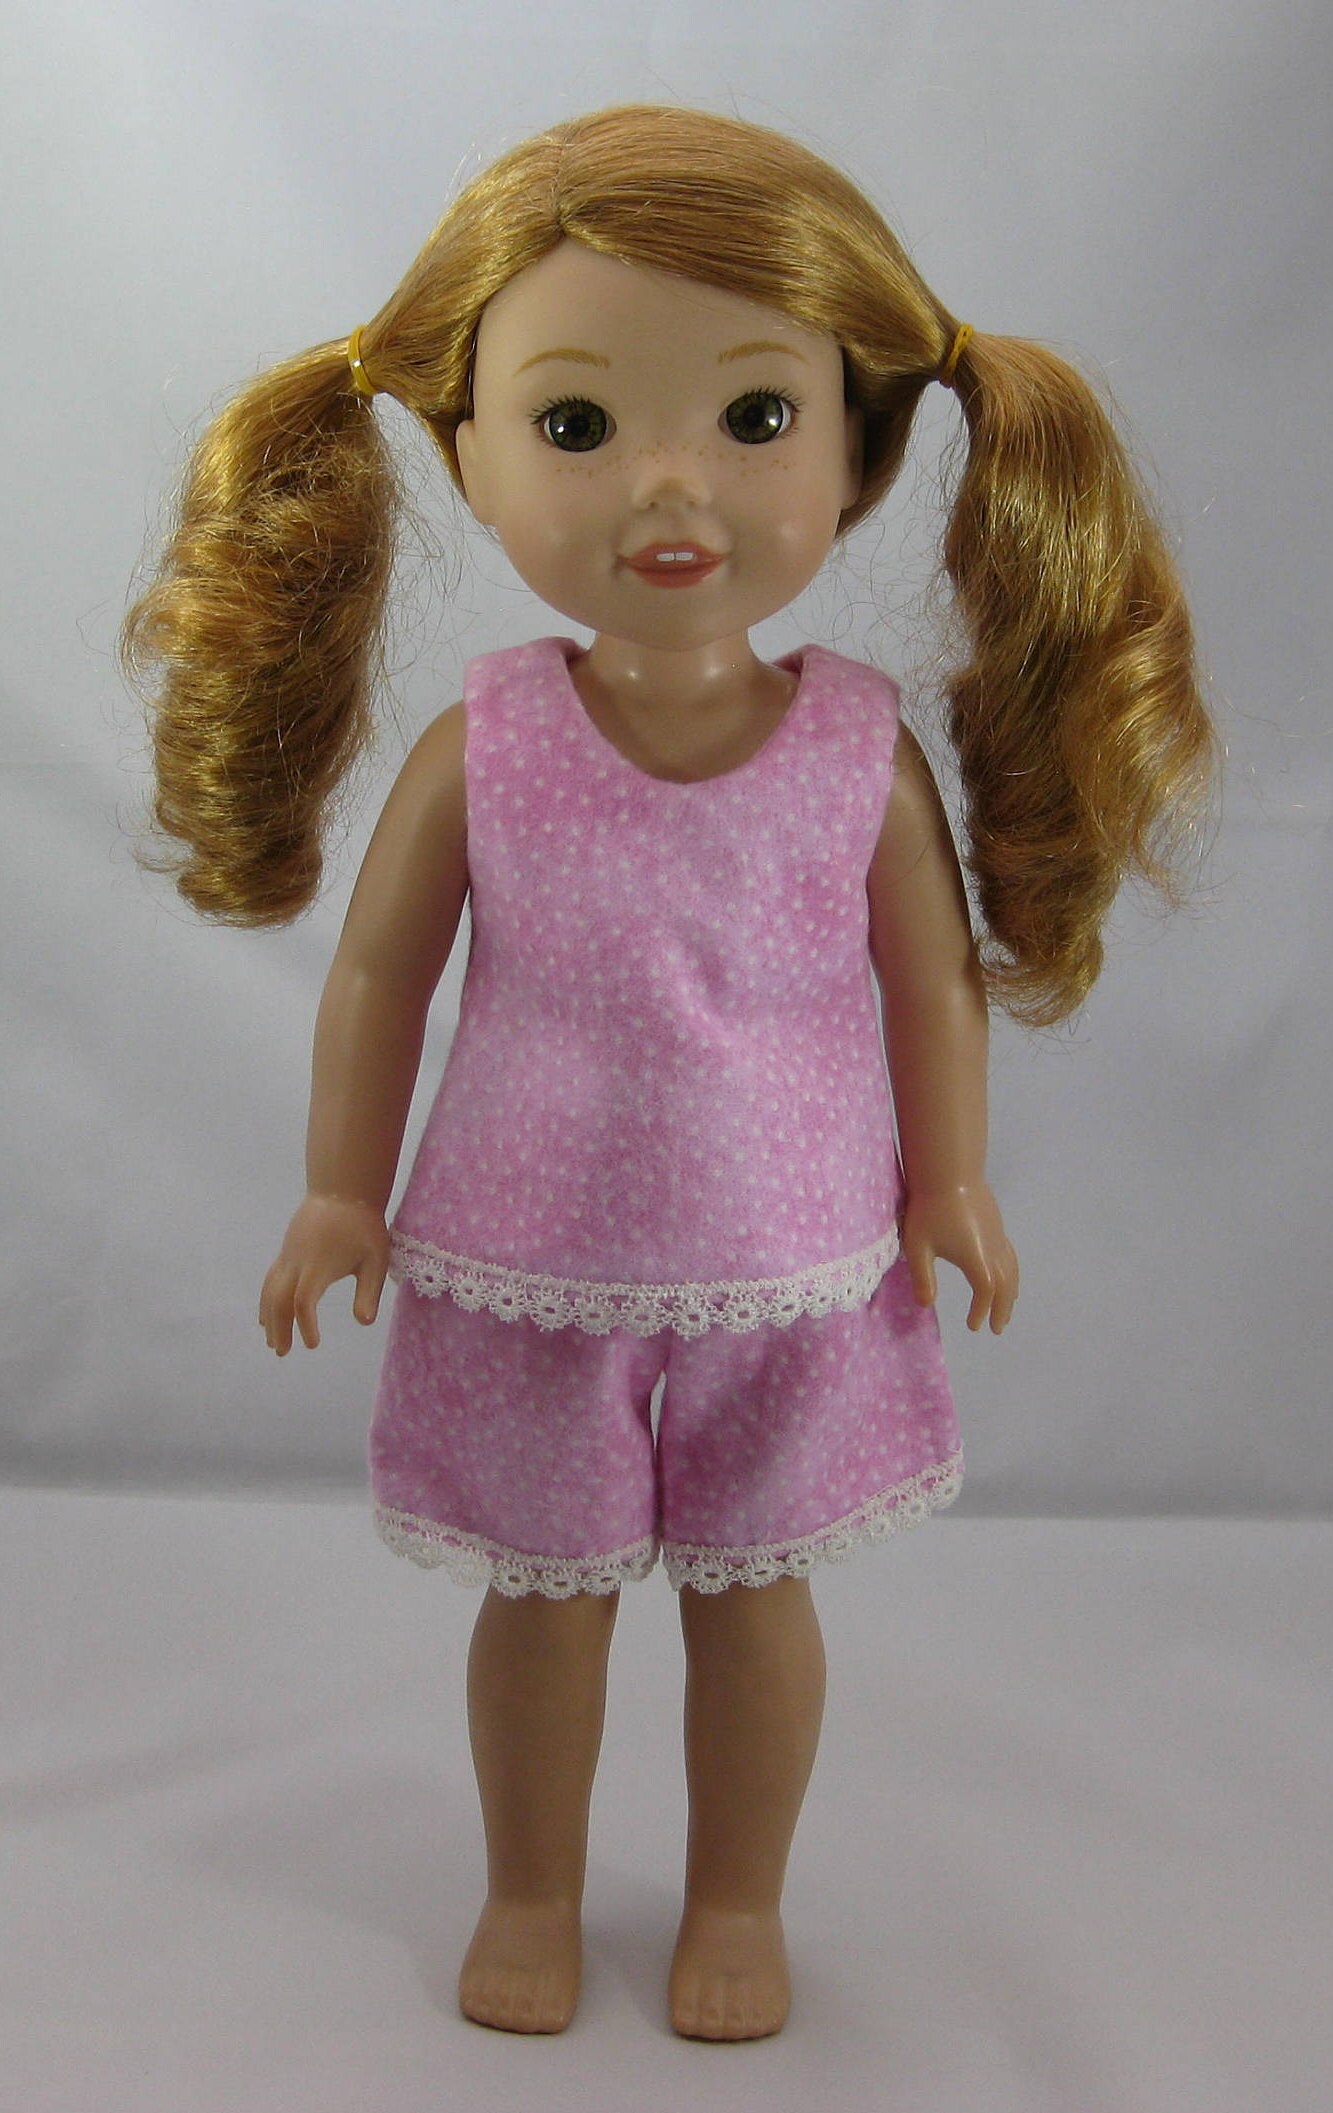 Wellie Wisher Pink Pajama Top and Shorts / 14.5 inch Doll